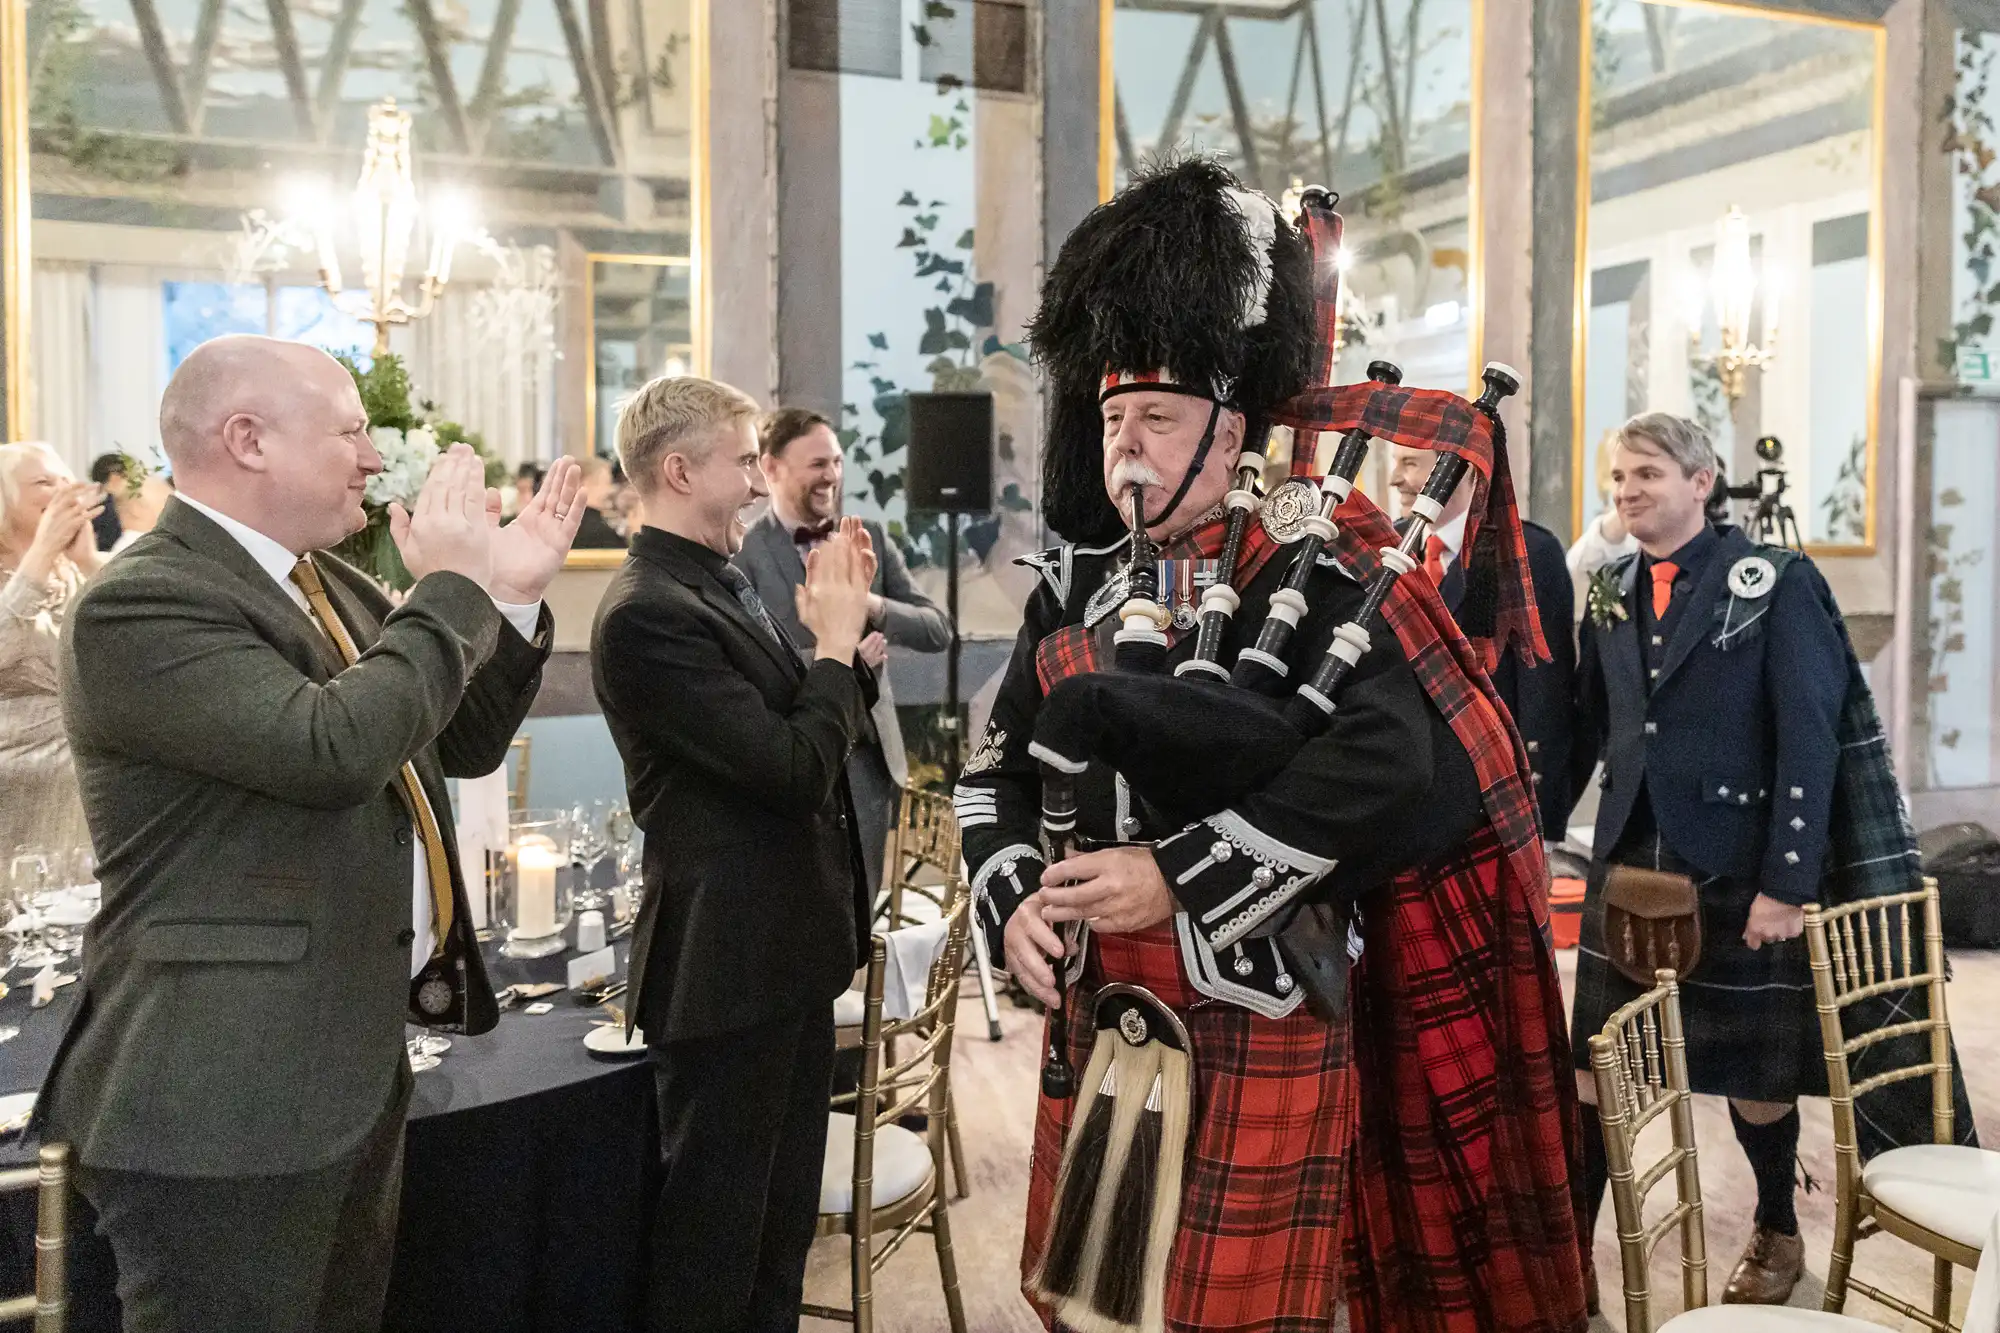 A bagpiper in traditional Scottish attire plays as guests clap and cheer inside an elegantly decorated venue.